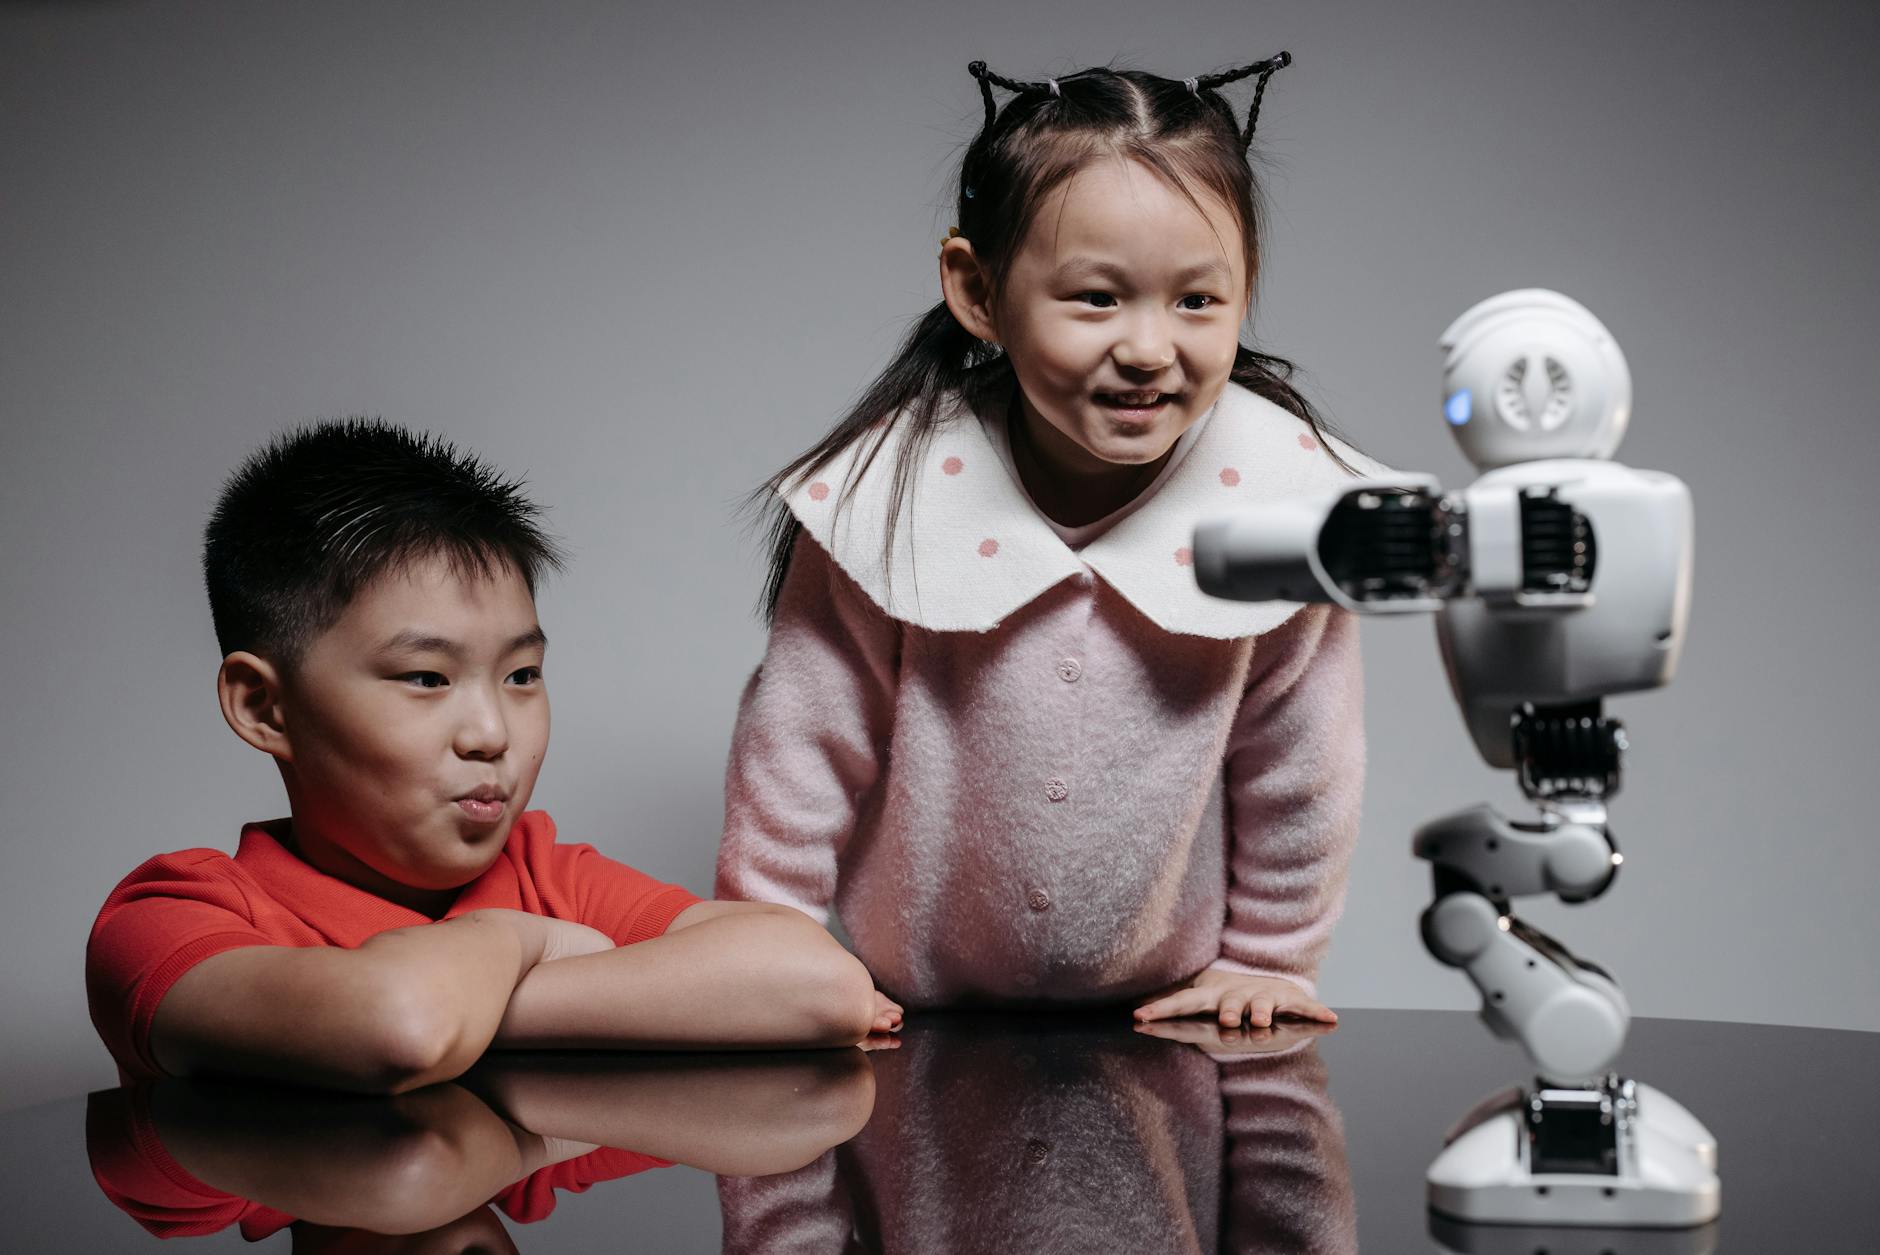 A Young Girl and Boy Looking at the Robot on the Table